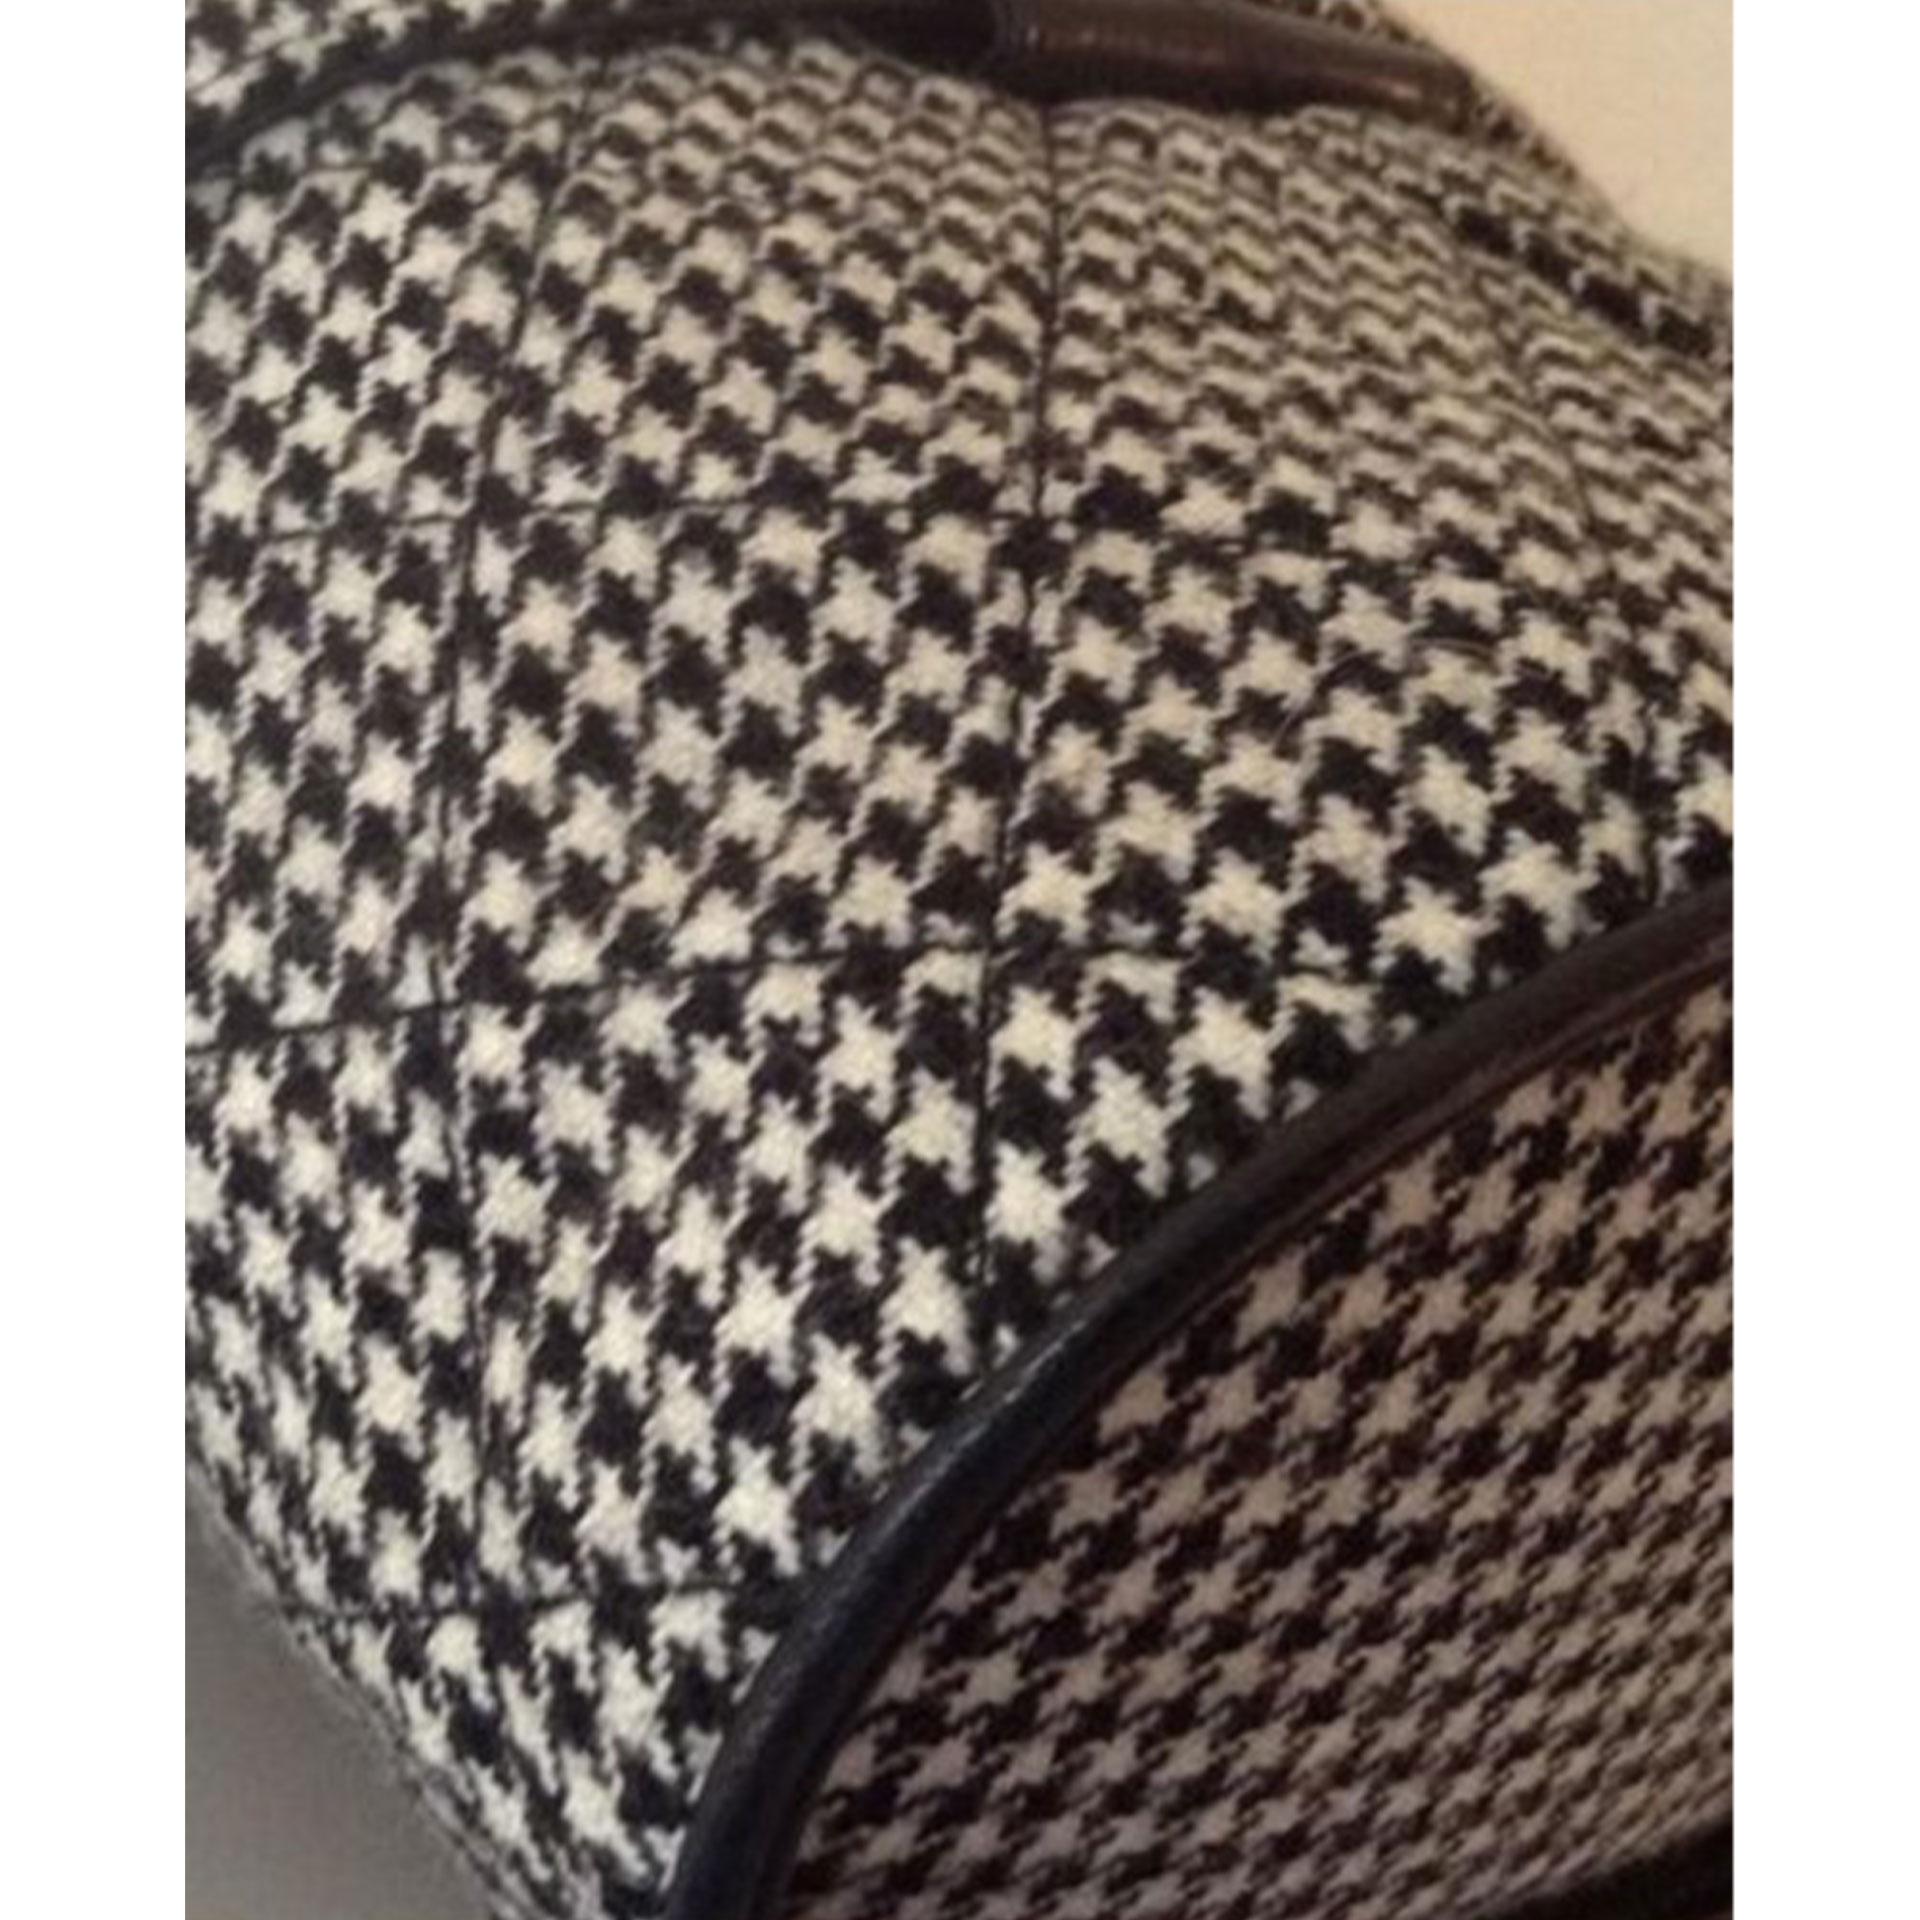 Chanel Vanity Case Very Rare Vintage 1990’s Houndstooth Black and White Wool Bag For Sale 2